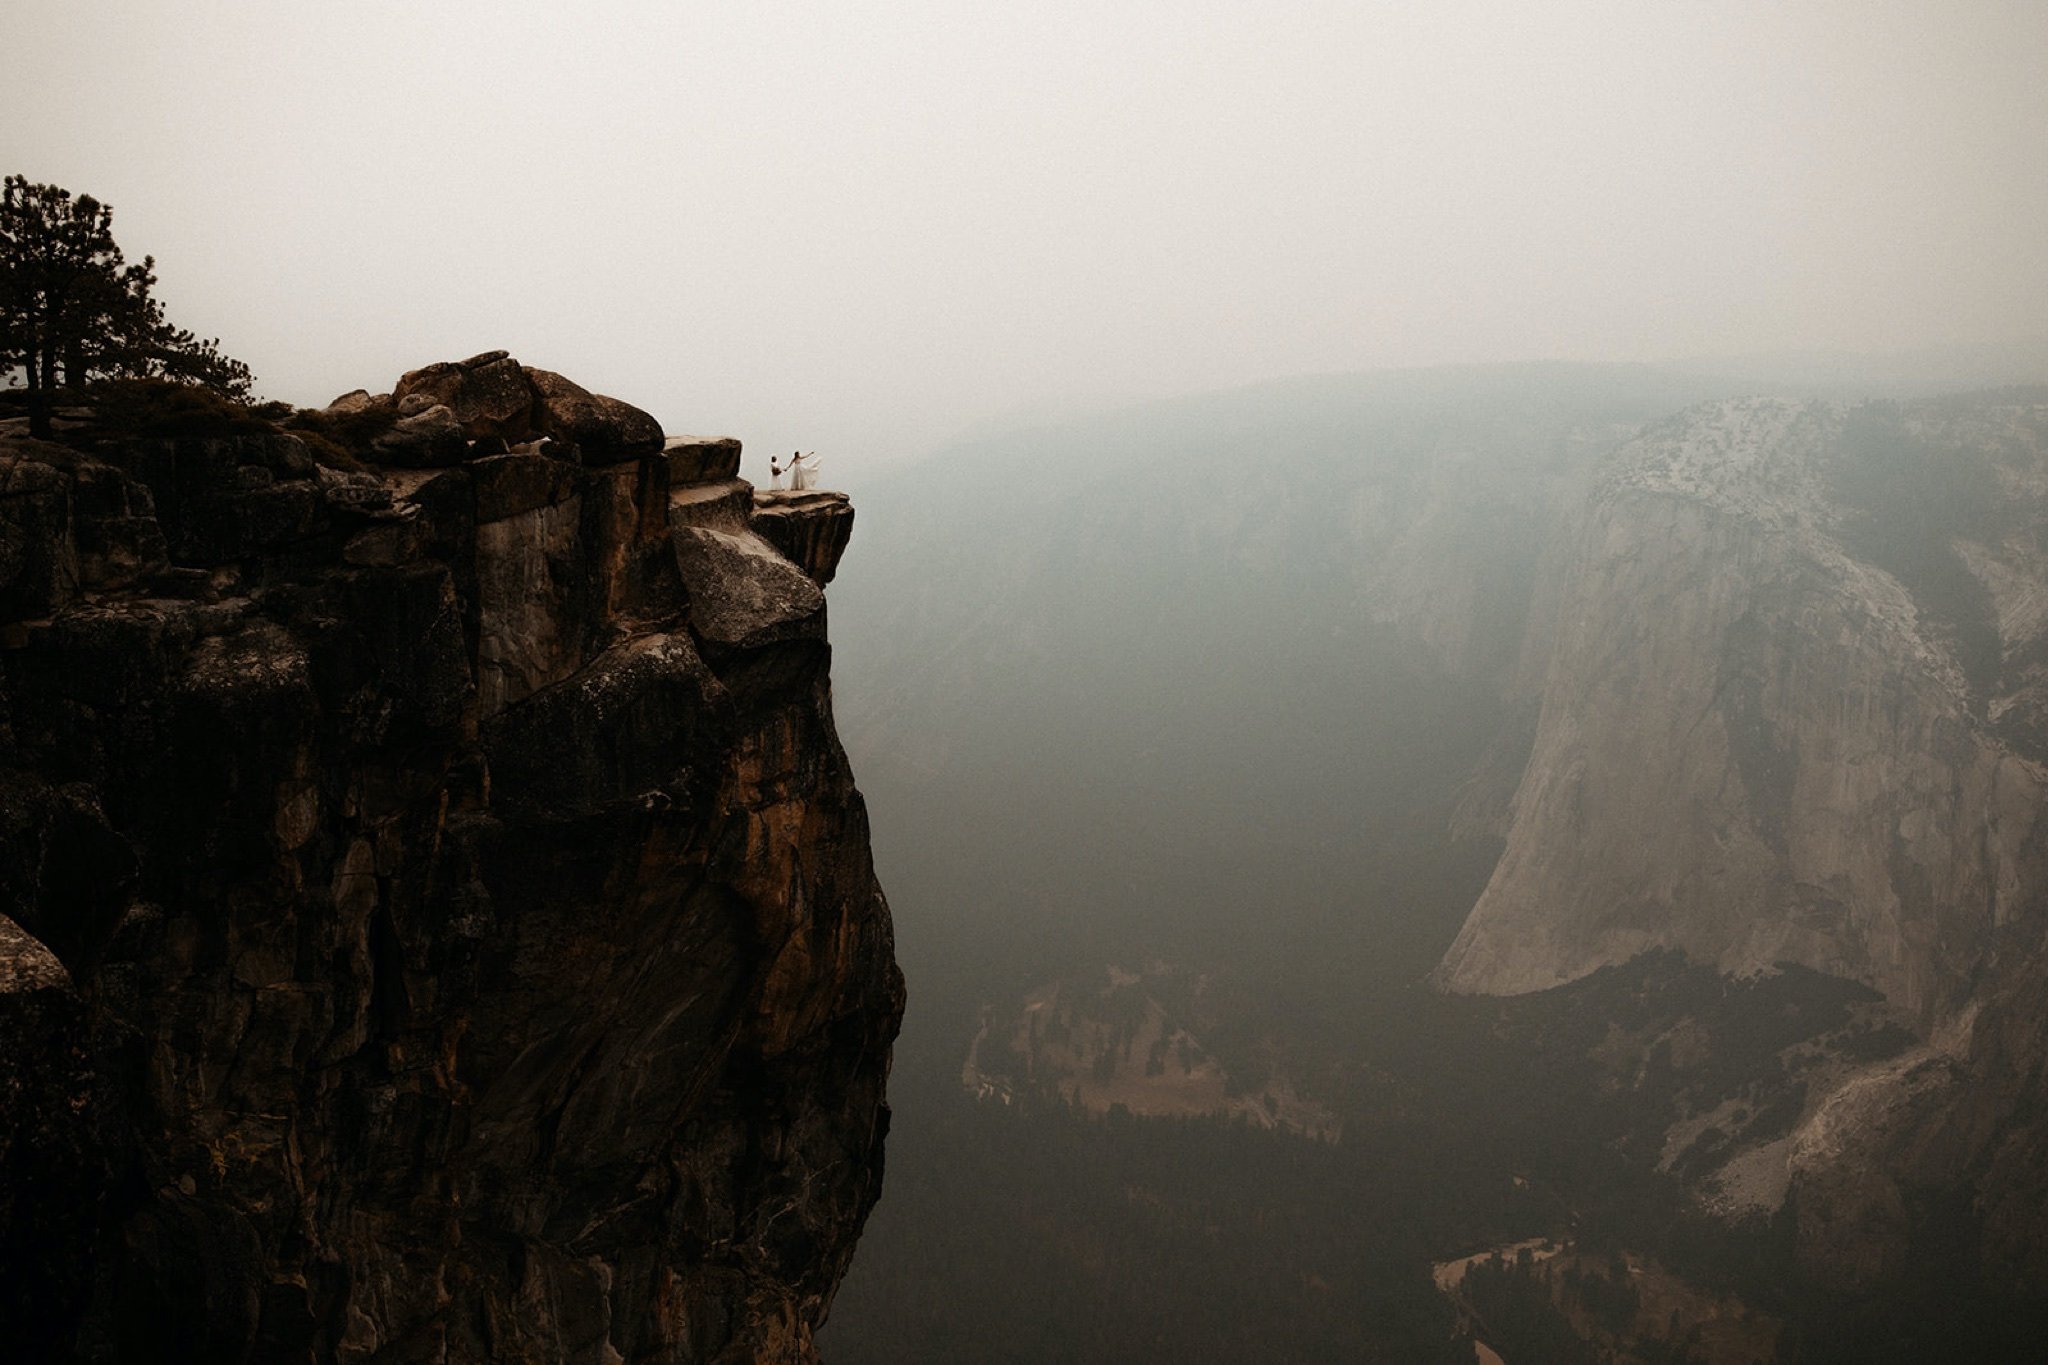 Yosemite National Park Elopement with Two Brides-Will Khoury35.jpg